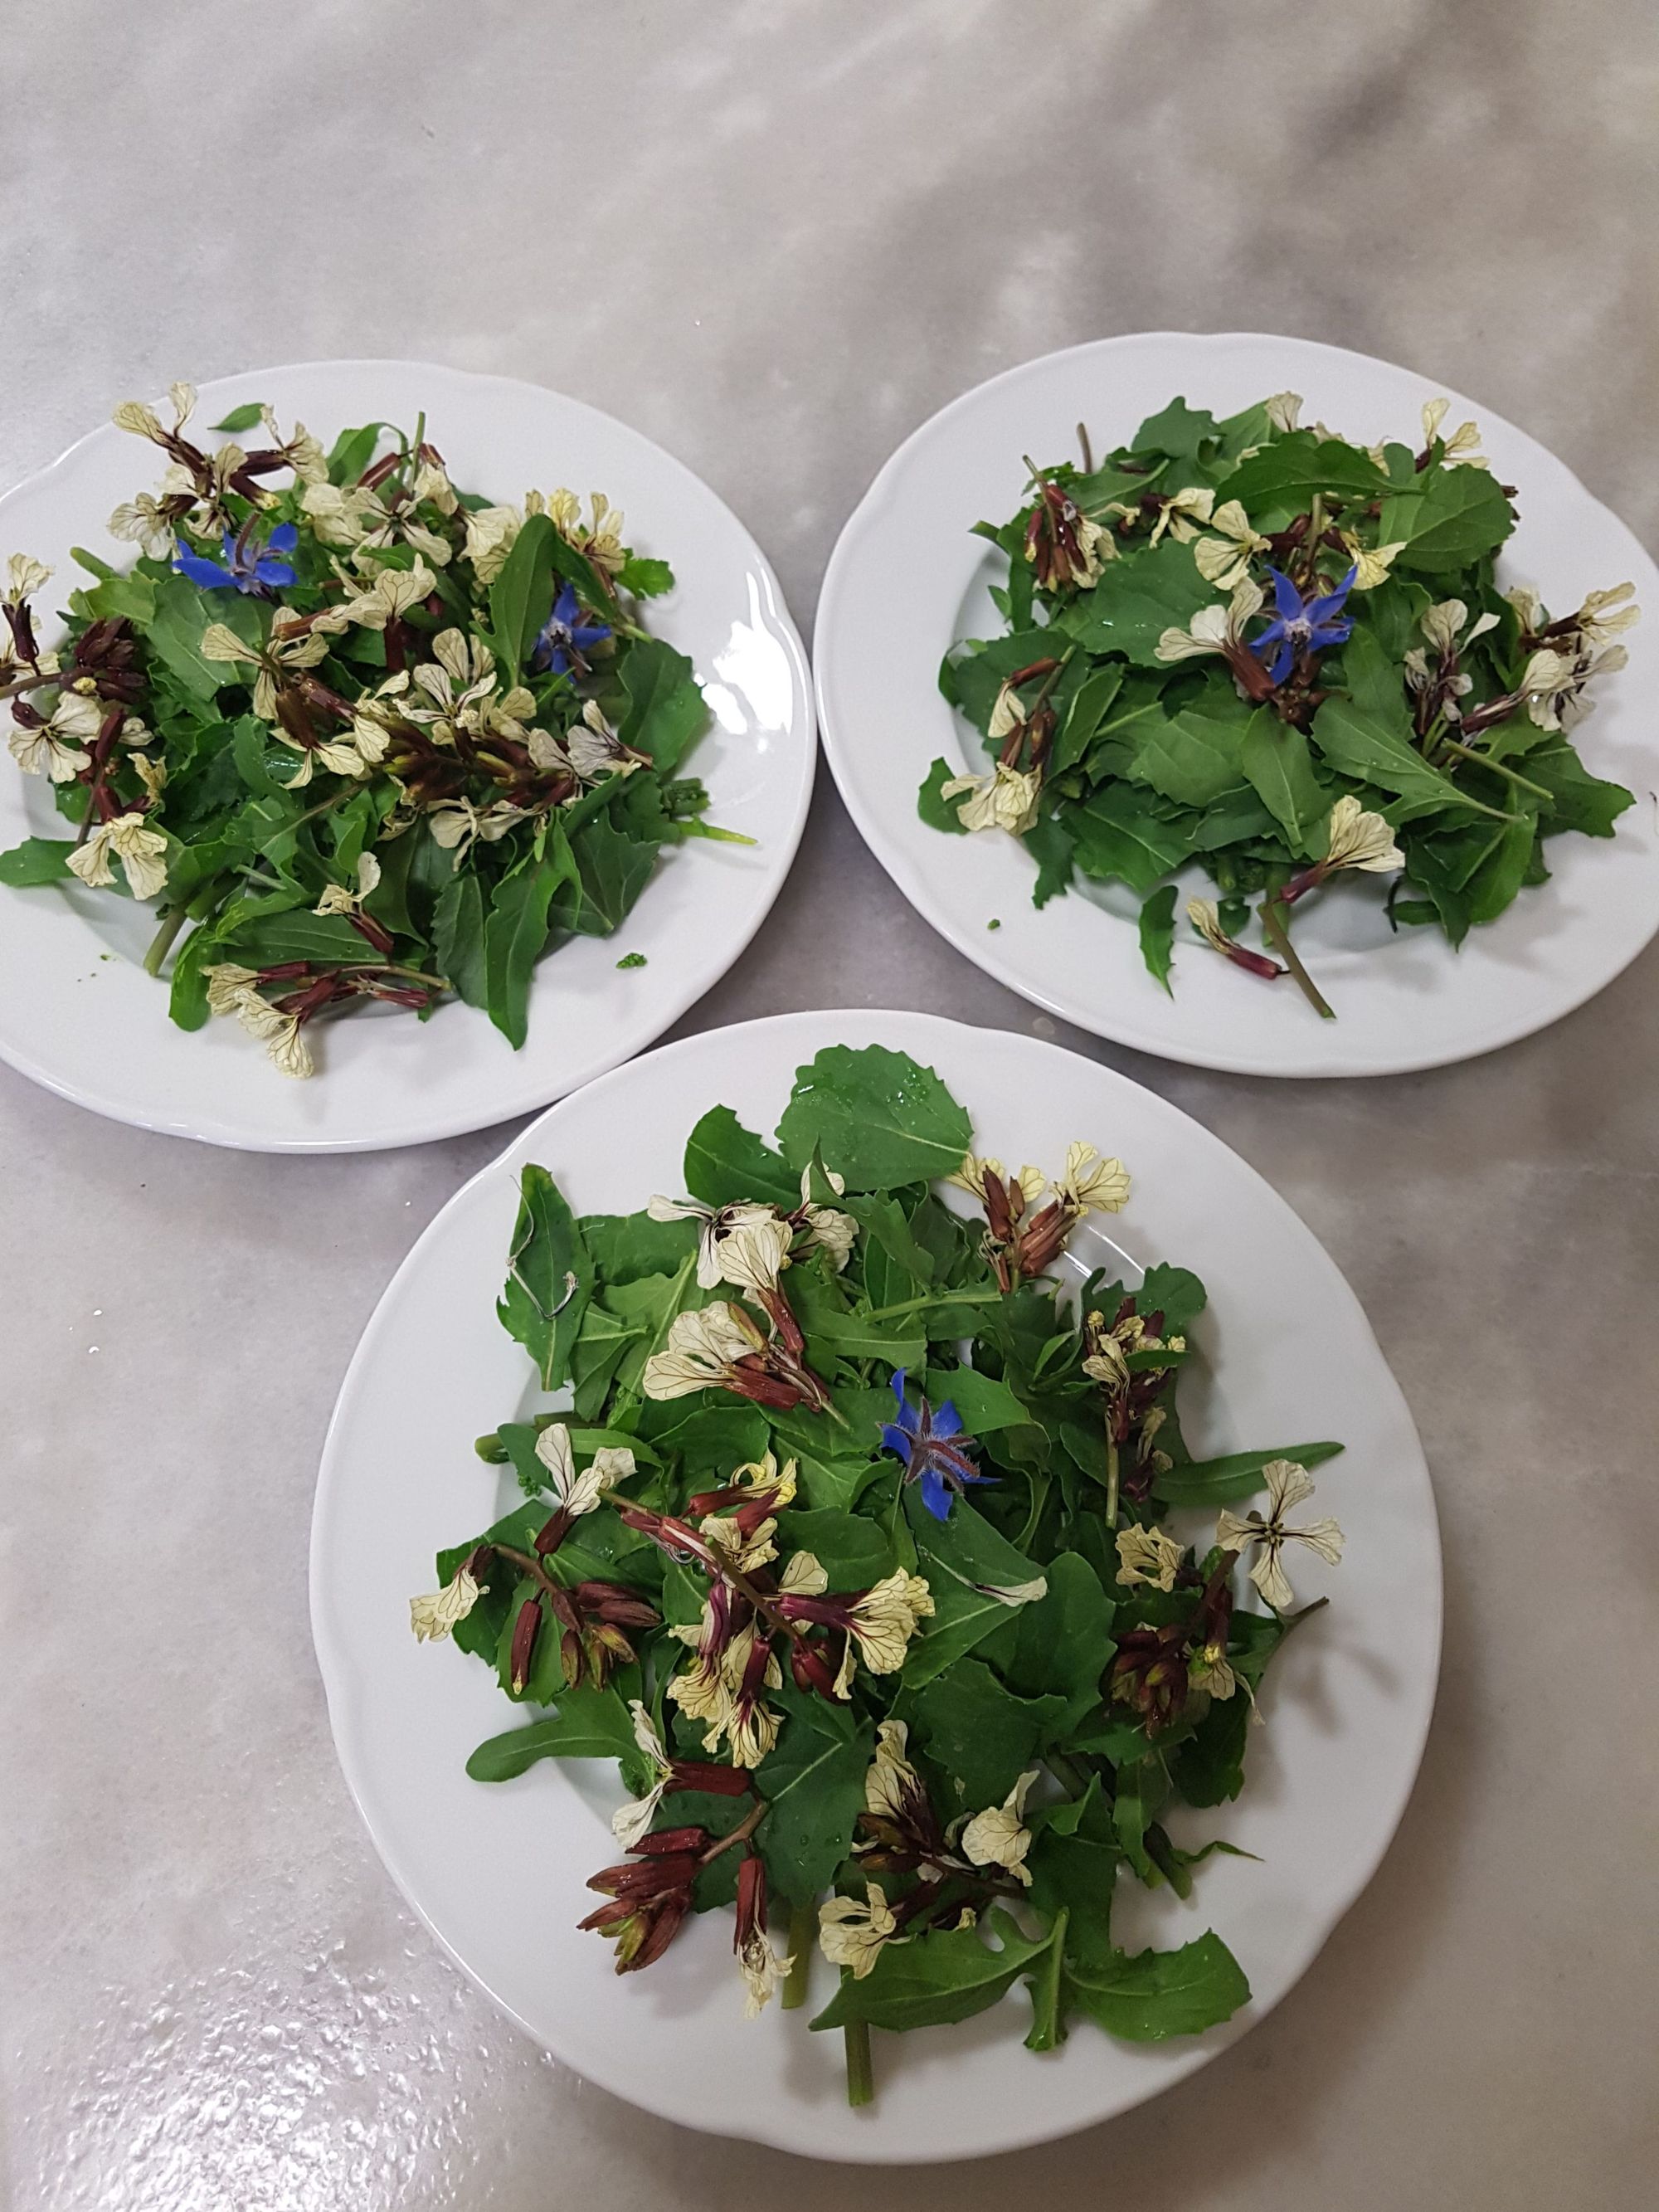 A salad made of cultivated and wild greens 